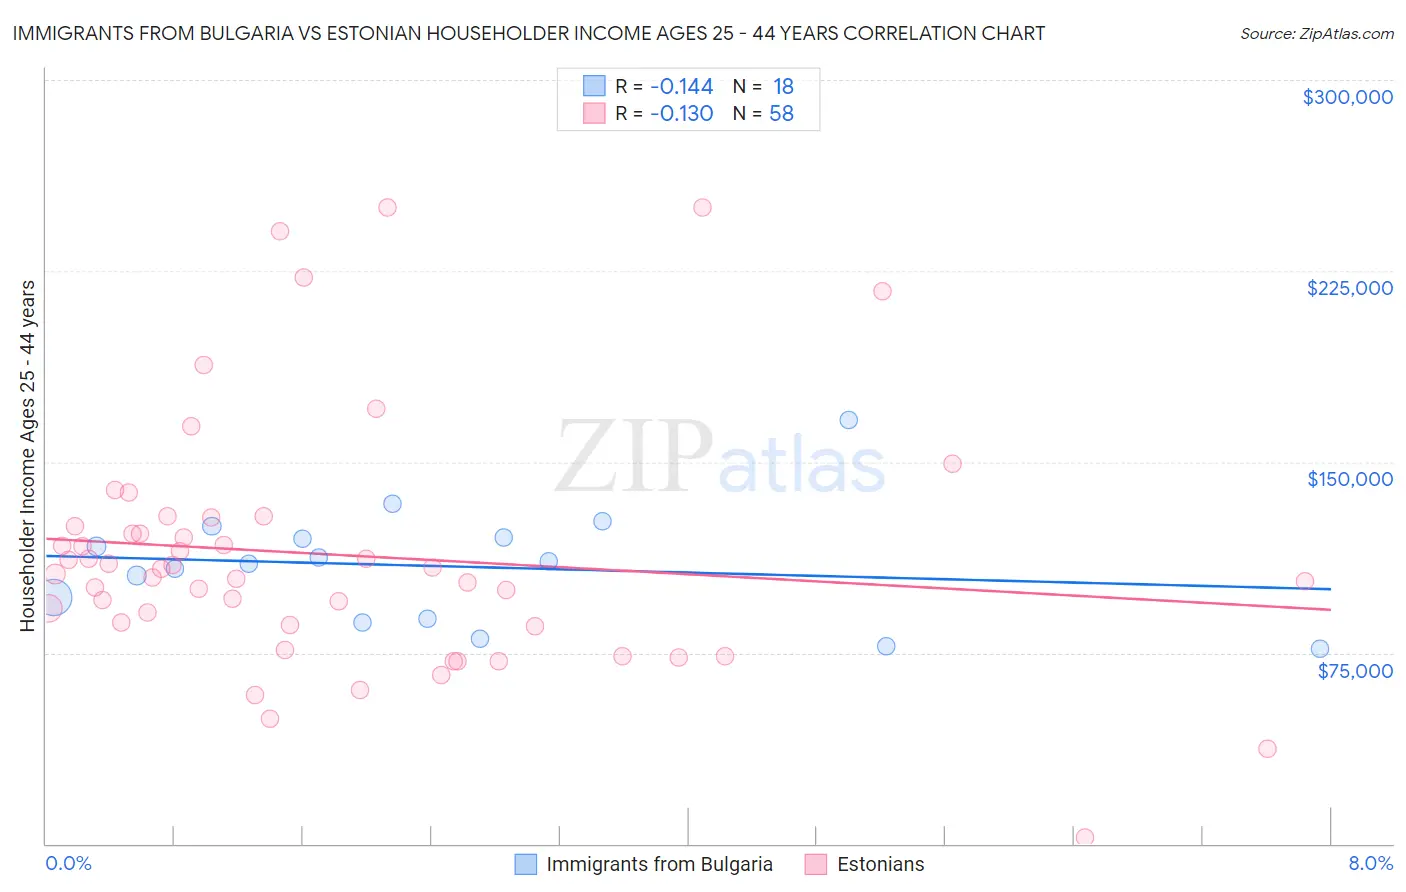 Immigrants from Bulgaria vs Estonian Householder Income Ages 25 - 44 years